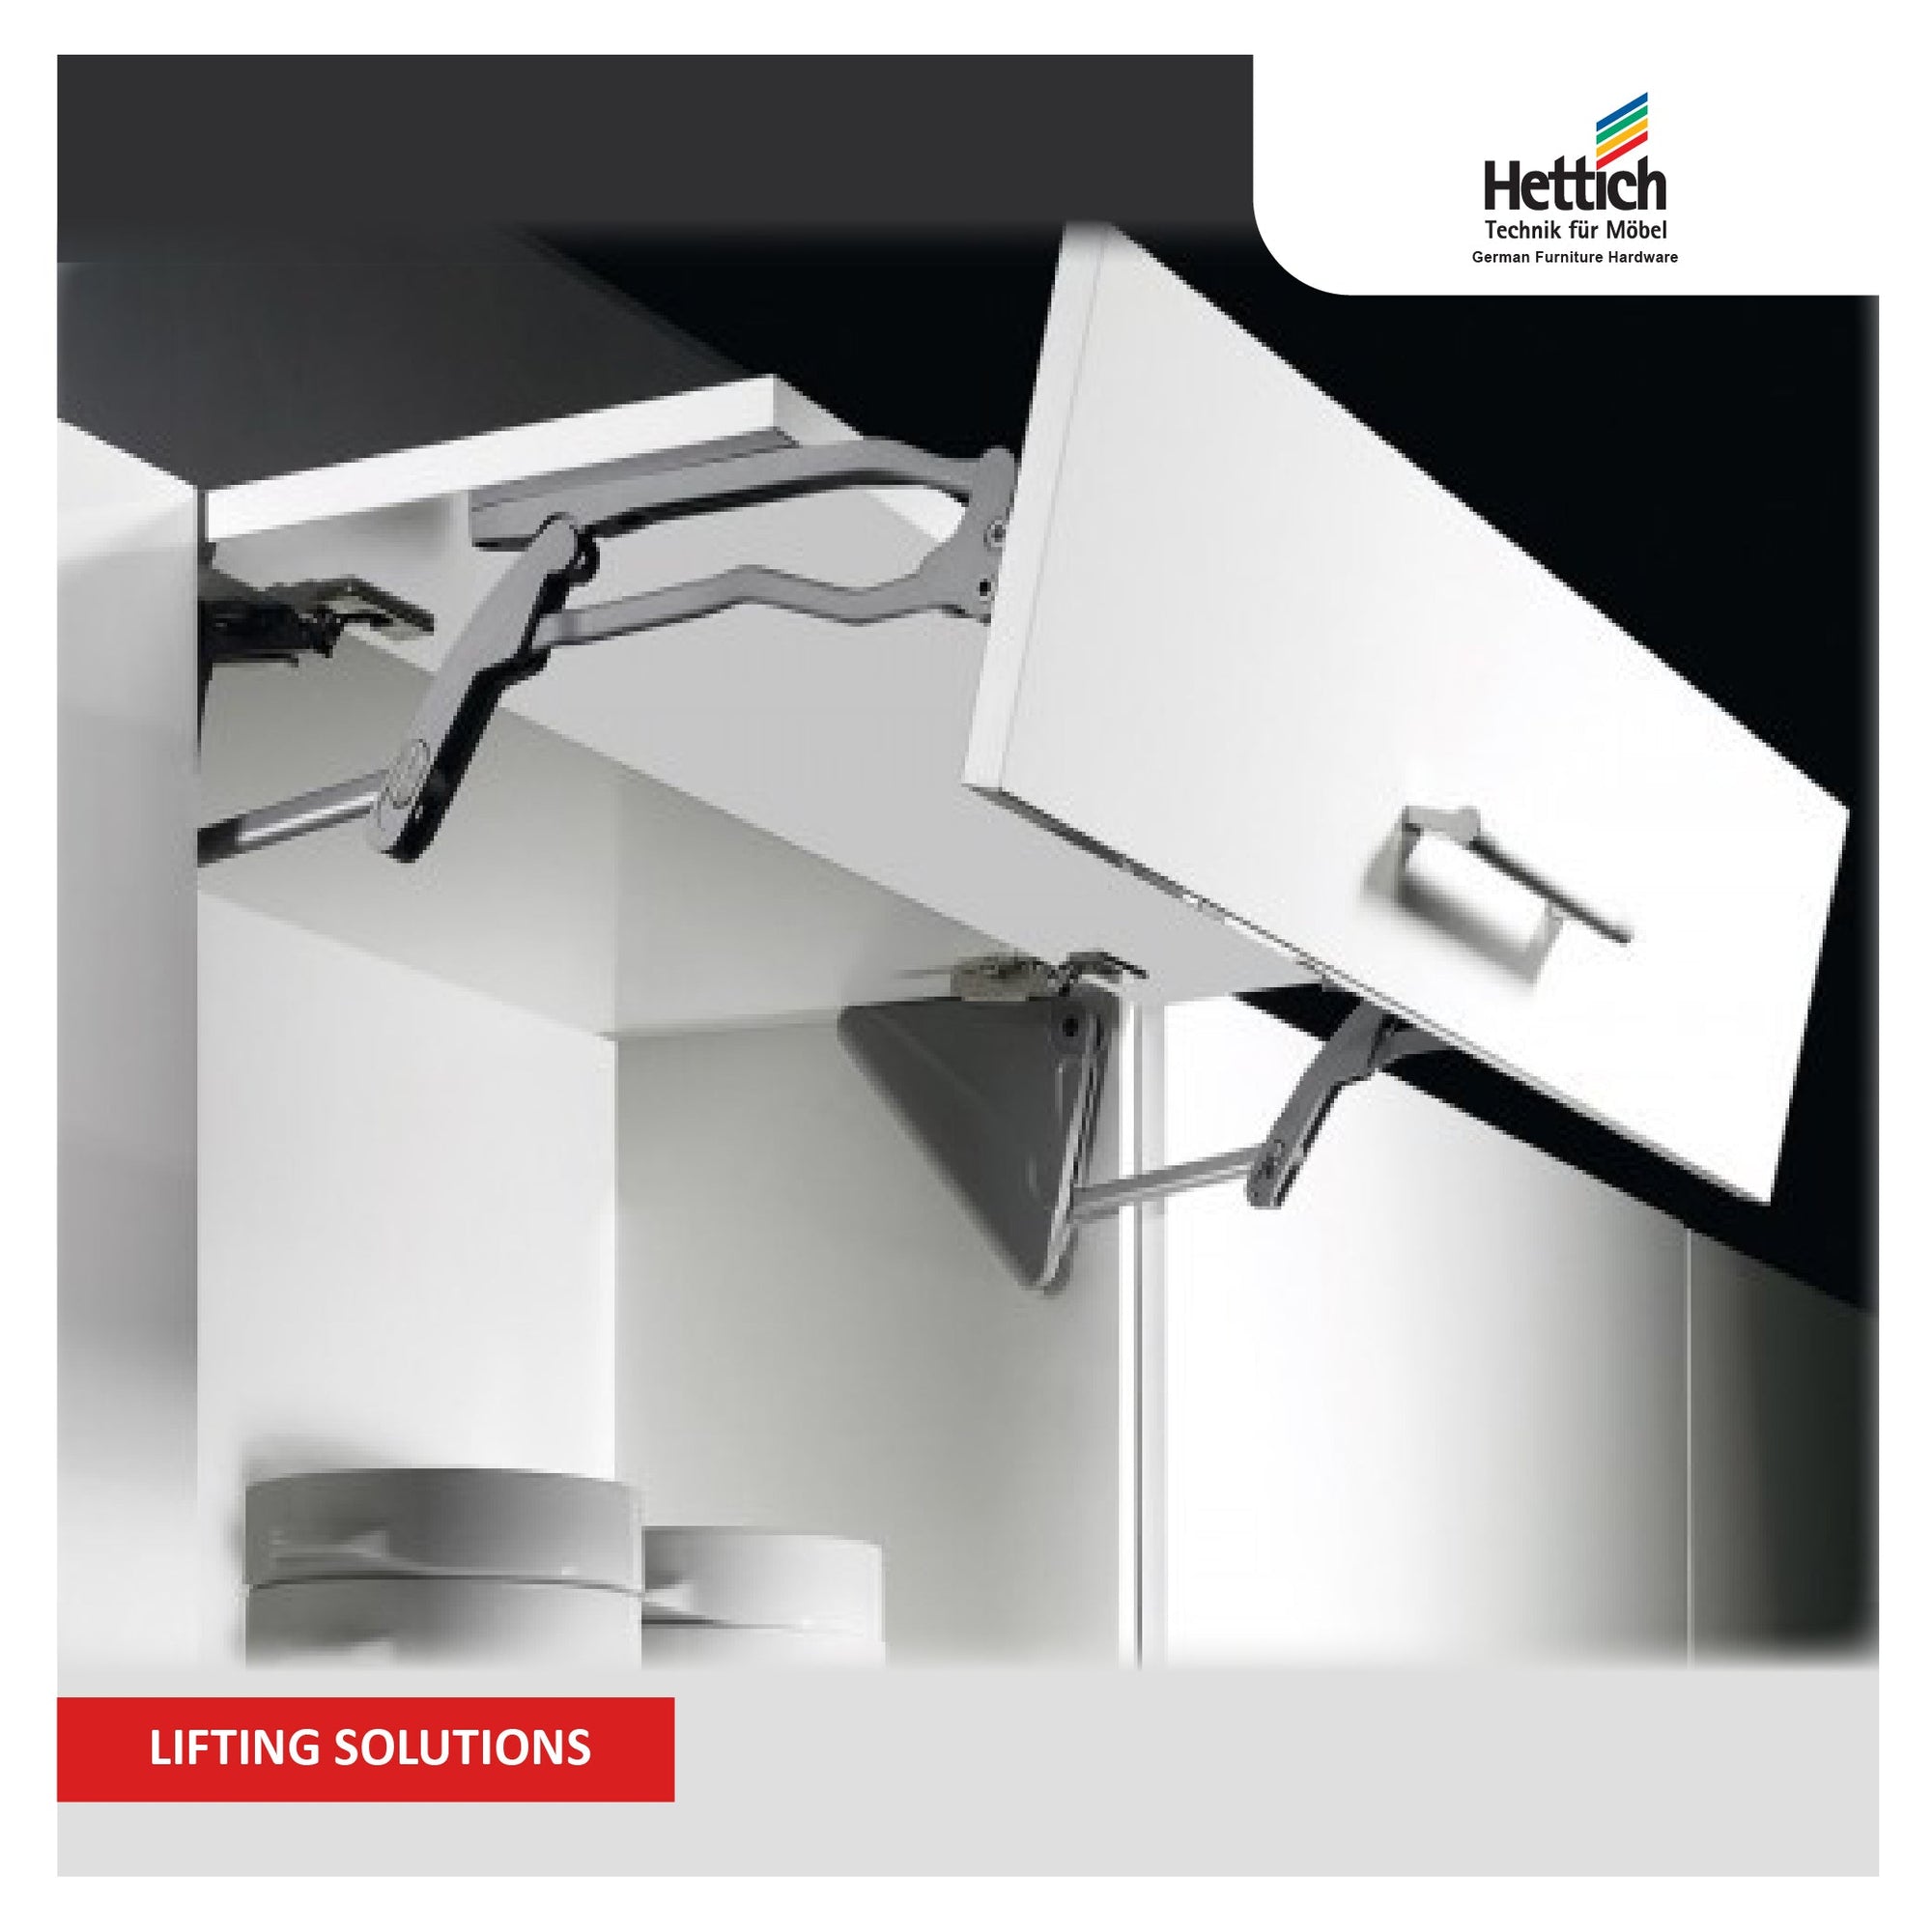 Hettich Lifting Solutions: Enhance furniture functionality with effortless lifting mechanisms and ergonomic design.